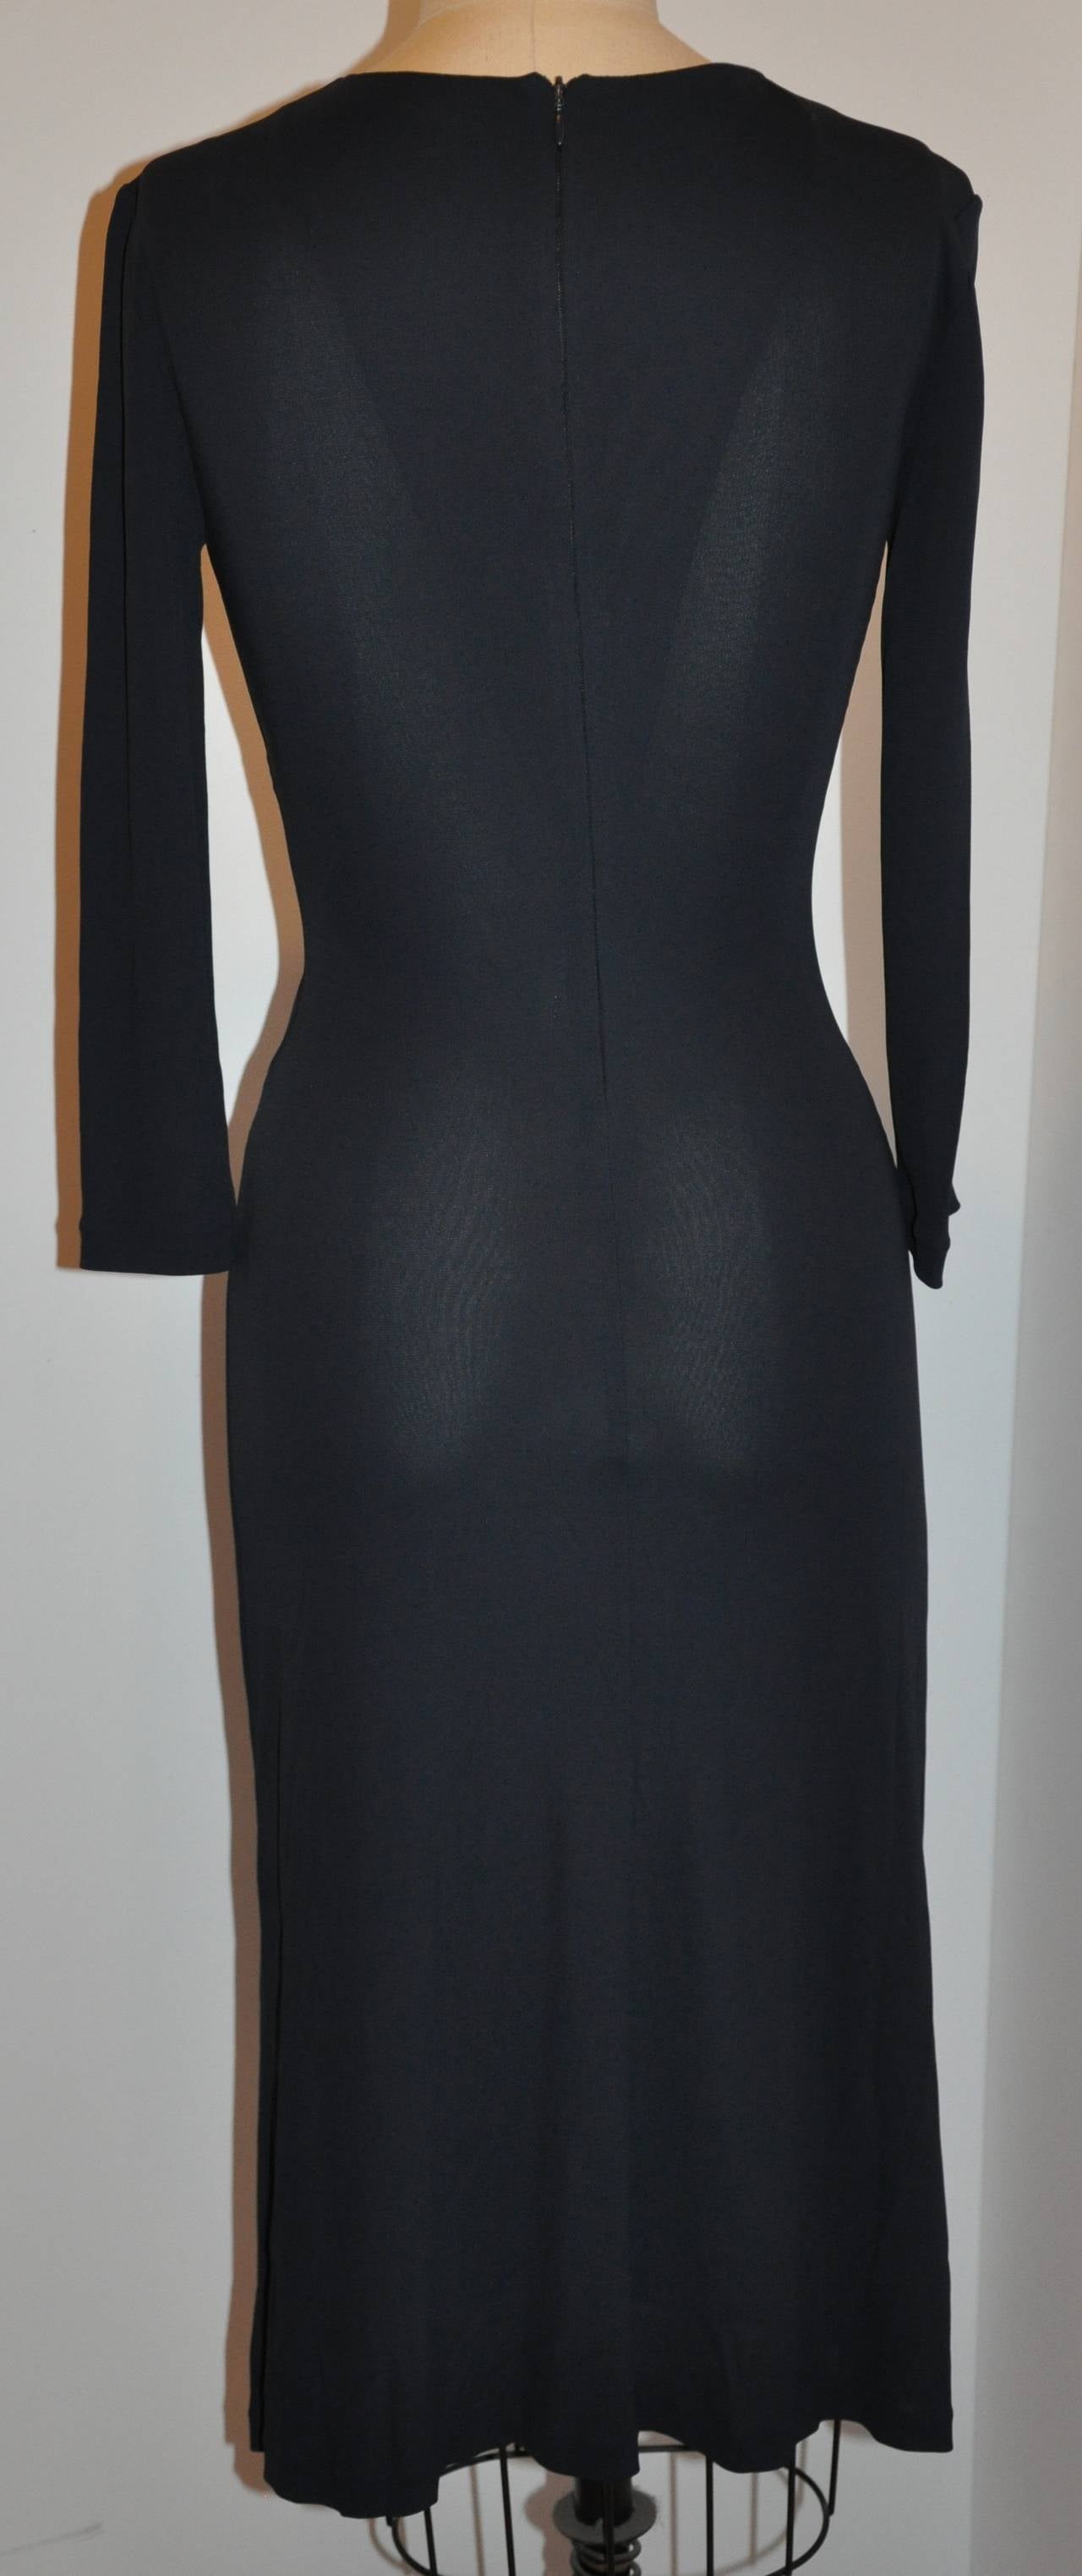 Georgio Armani midnight blue silk jersey form-fitting dress has a wonderfully elegant, yet sexy and flattering deep-plunge front. The sleeves are mid-length, just enough to cover the elbows.The invisible center back zipper measures 16